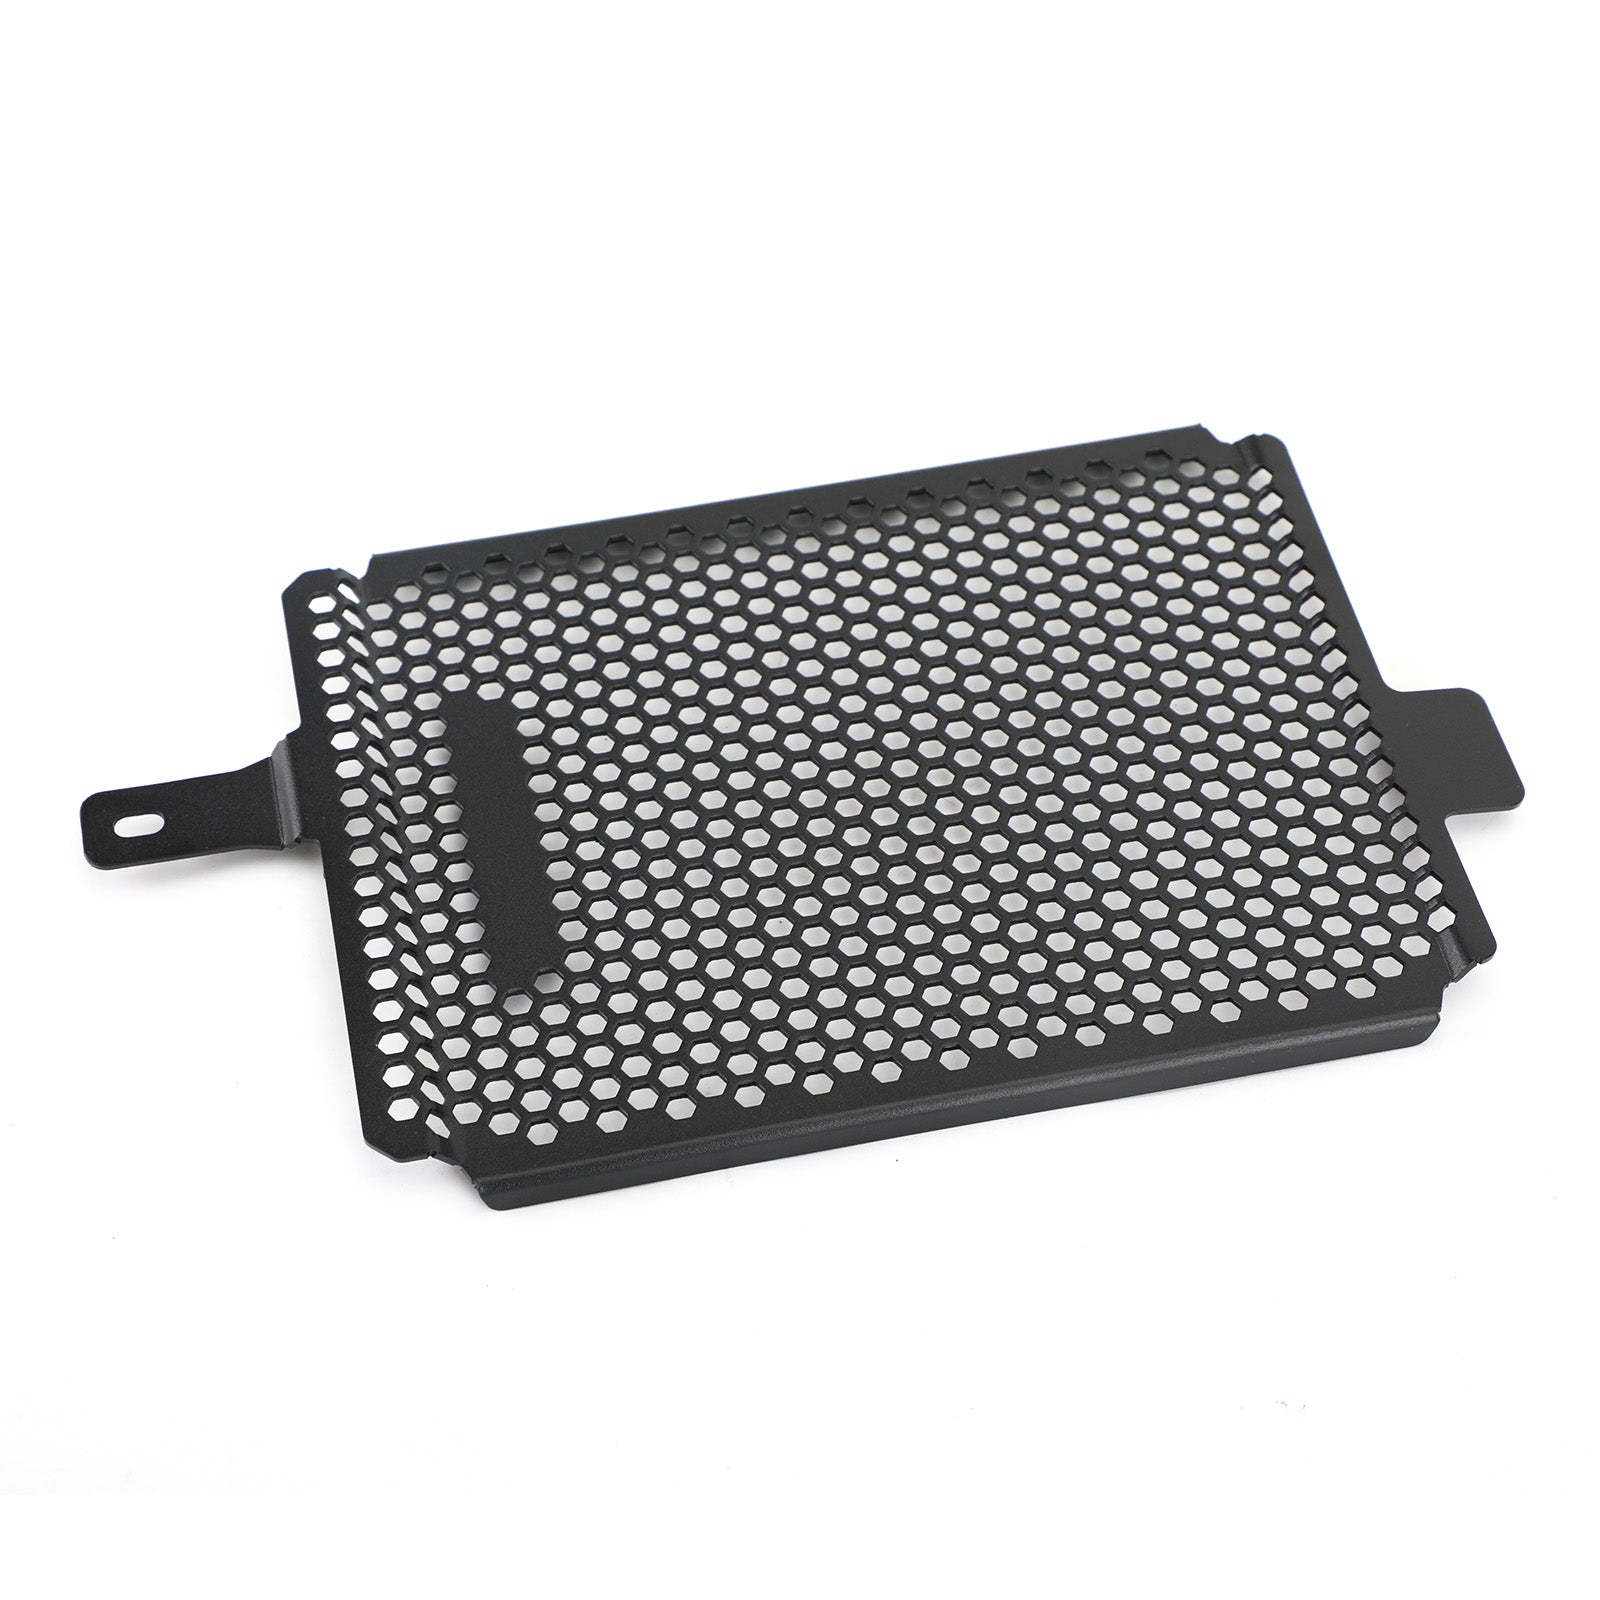 Radiator Guard Cover Grill Fit For Bmw R 1250 Gs Adventure Rallye Te 19-20